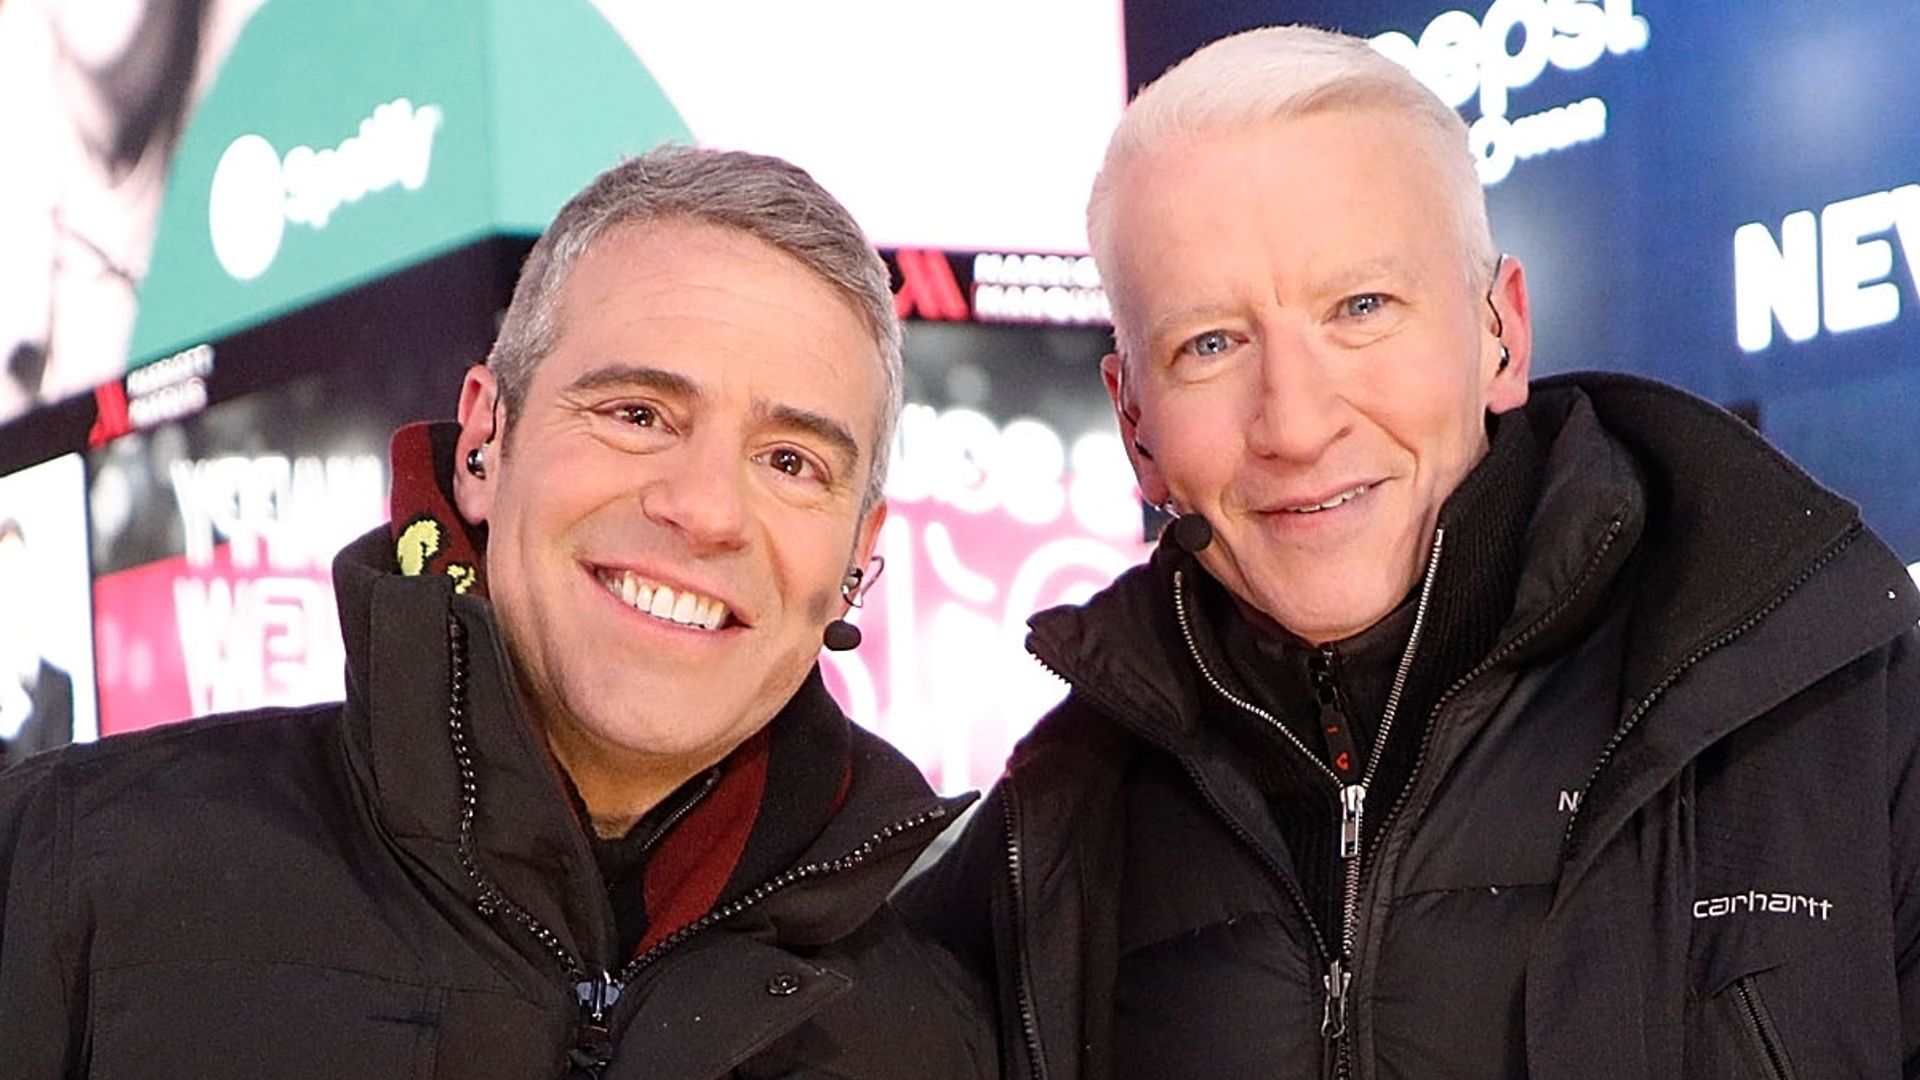 Why Andy Cohen and Anderson Cooper's New Year's Eve celebrations will